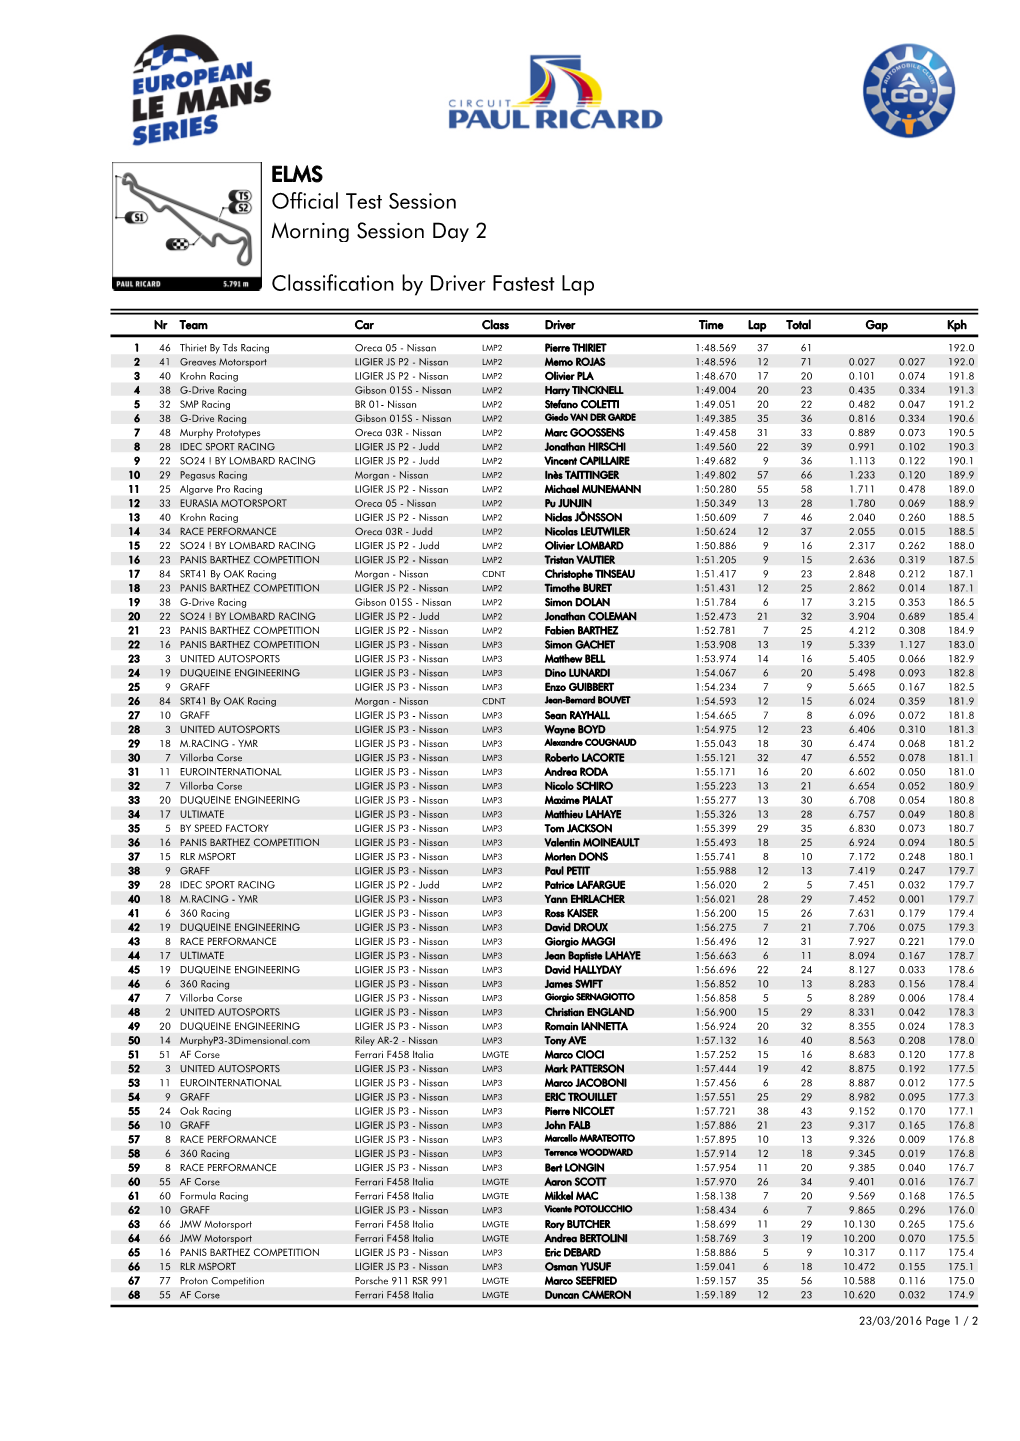 Classification by Driver Fastest Lap Morning Session